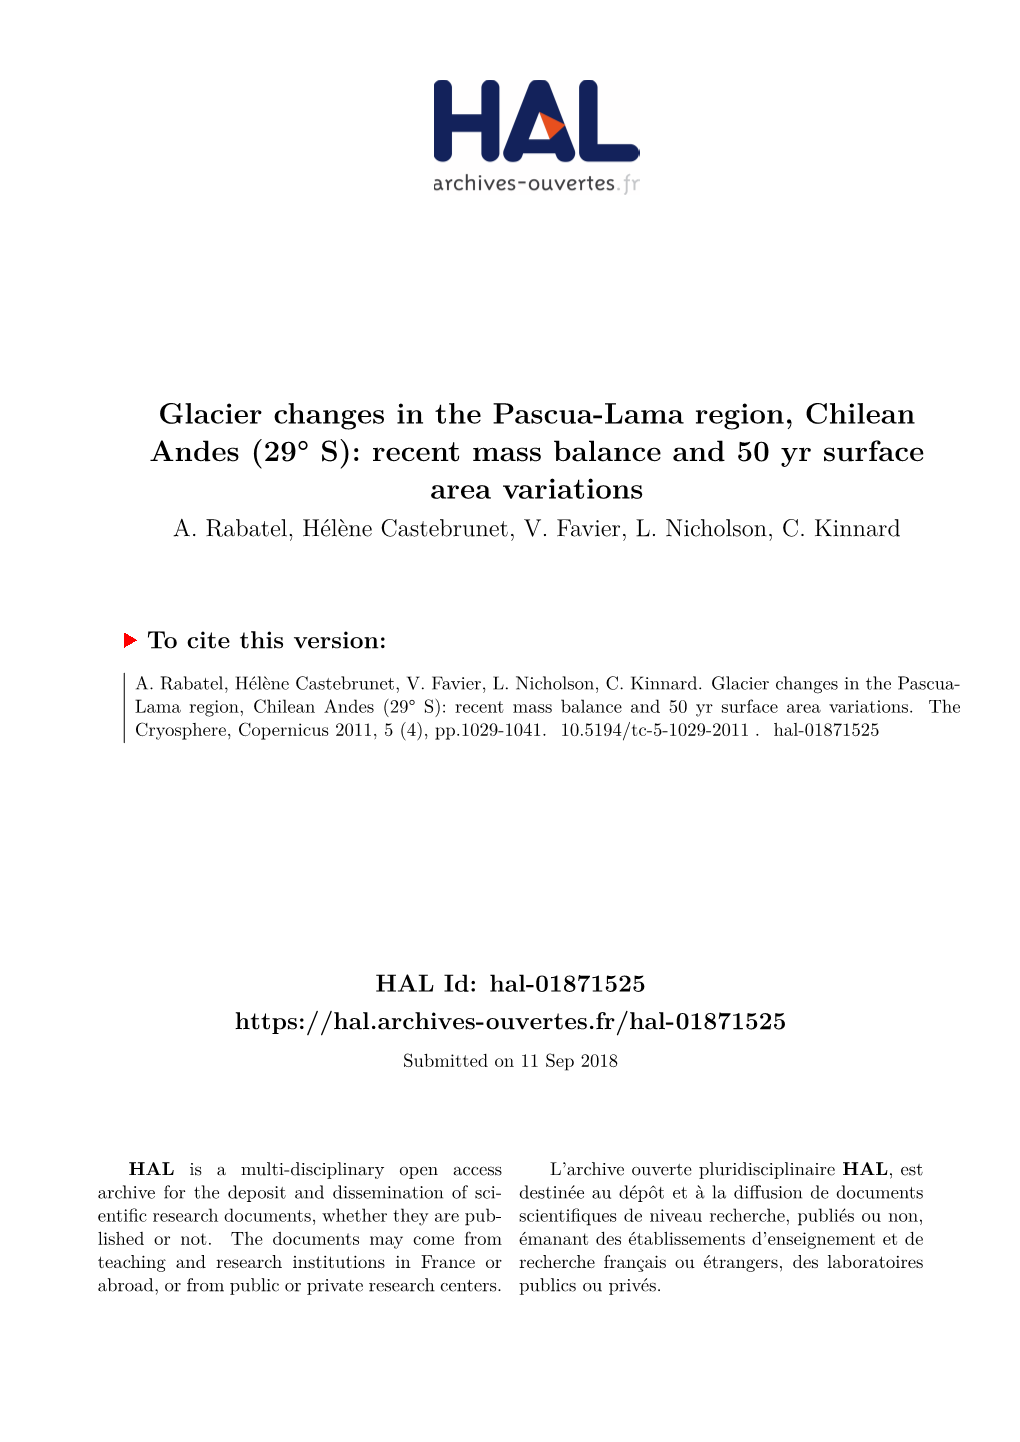 Glacier Changes in the Pascua-Lama Region, Chilean Andes (29° S): Recent Mass Balance and 50 Yr Surface Area Variations A